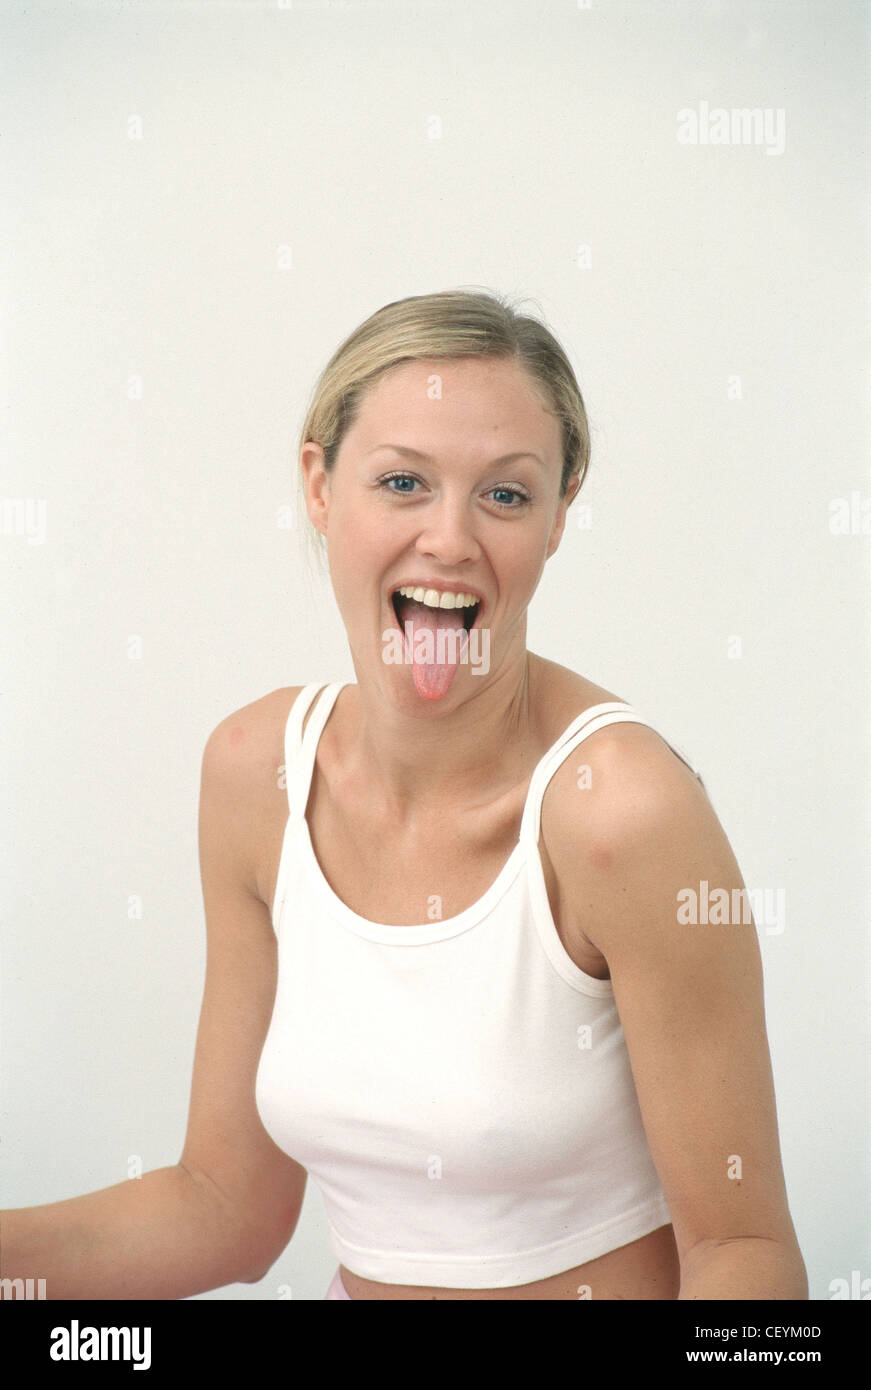 Female with long blonde hair off face wearing cropped white vest top and subtle make up looking to camera sticking tongue out Stock Photo